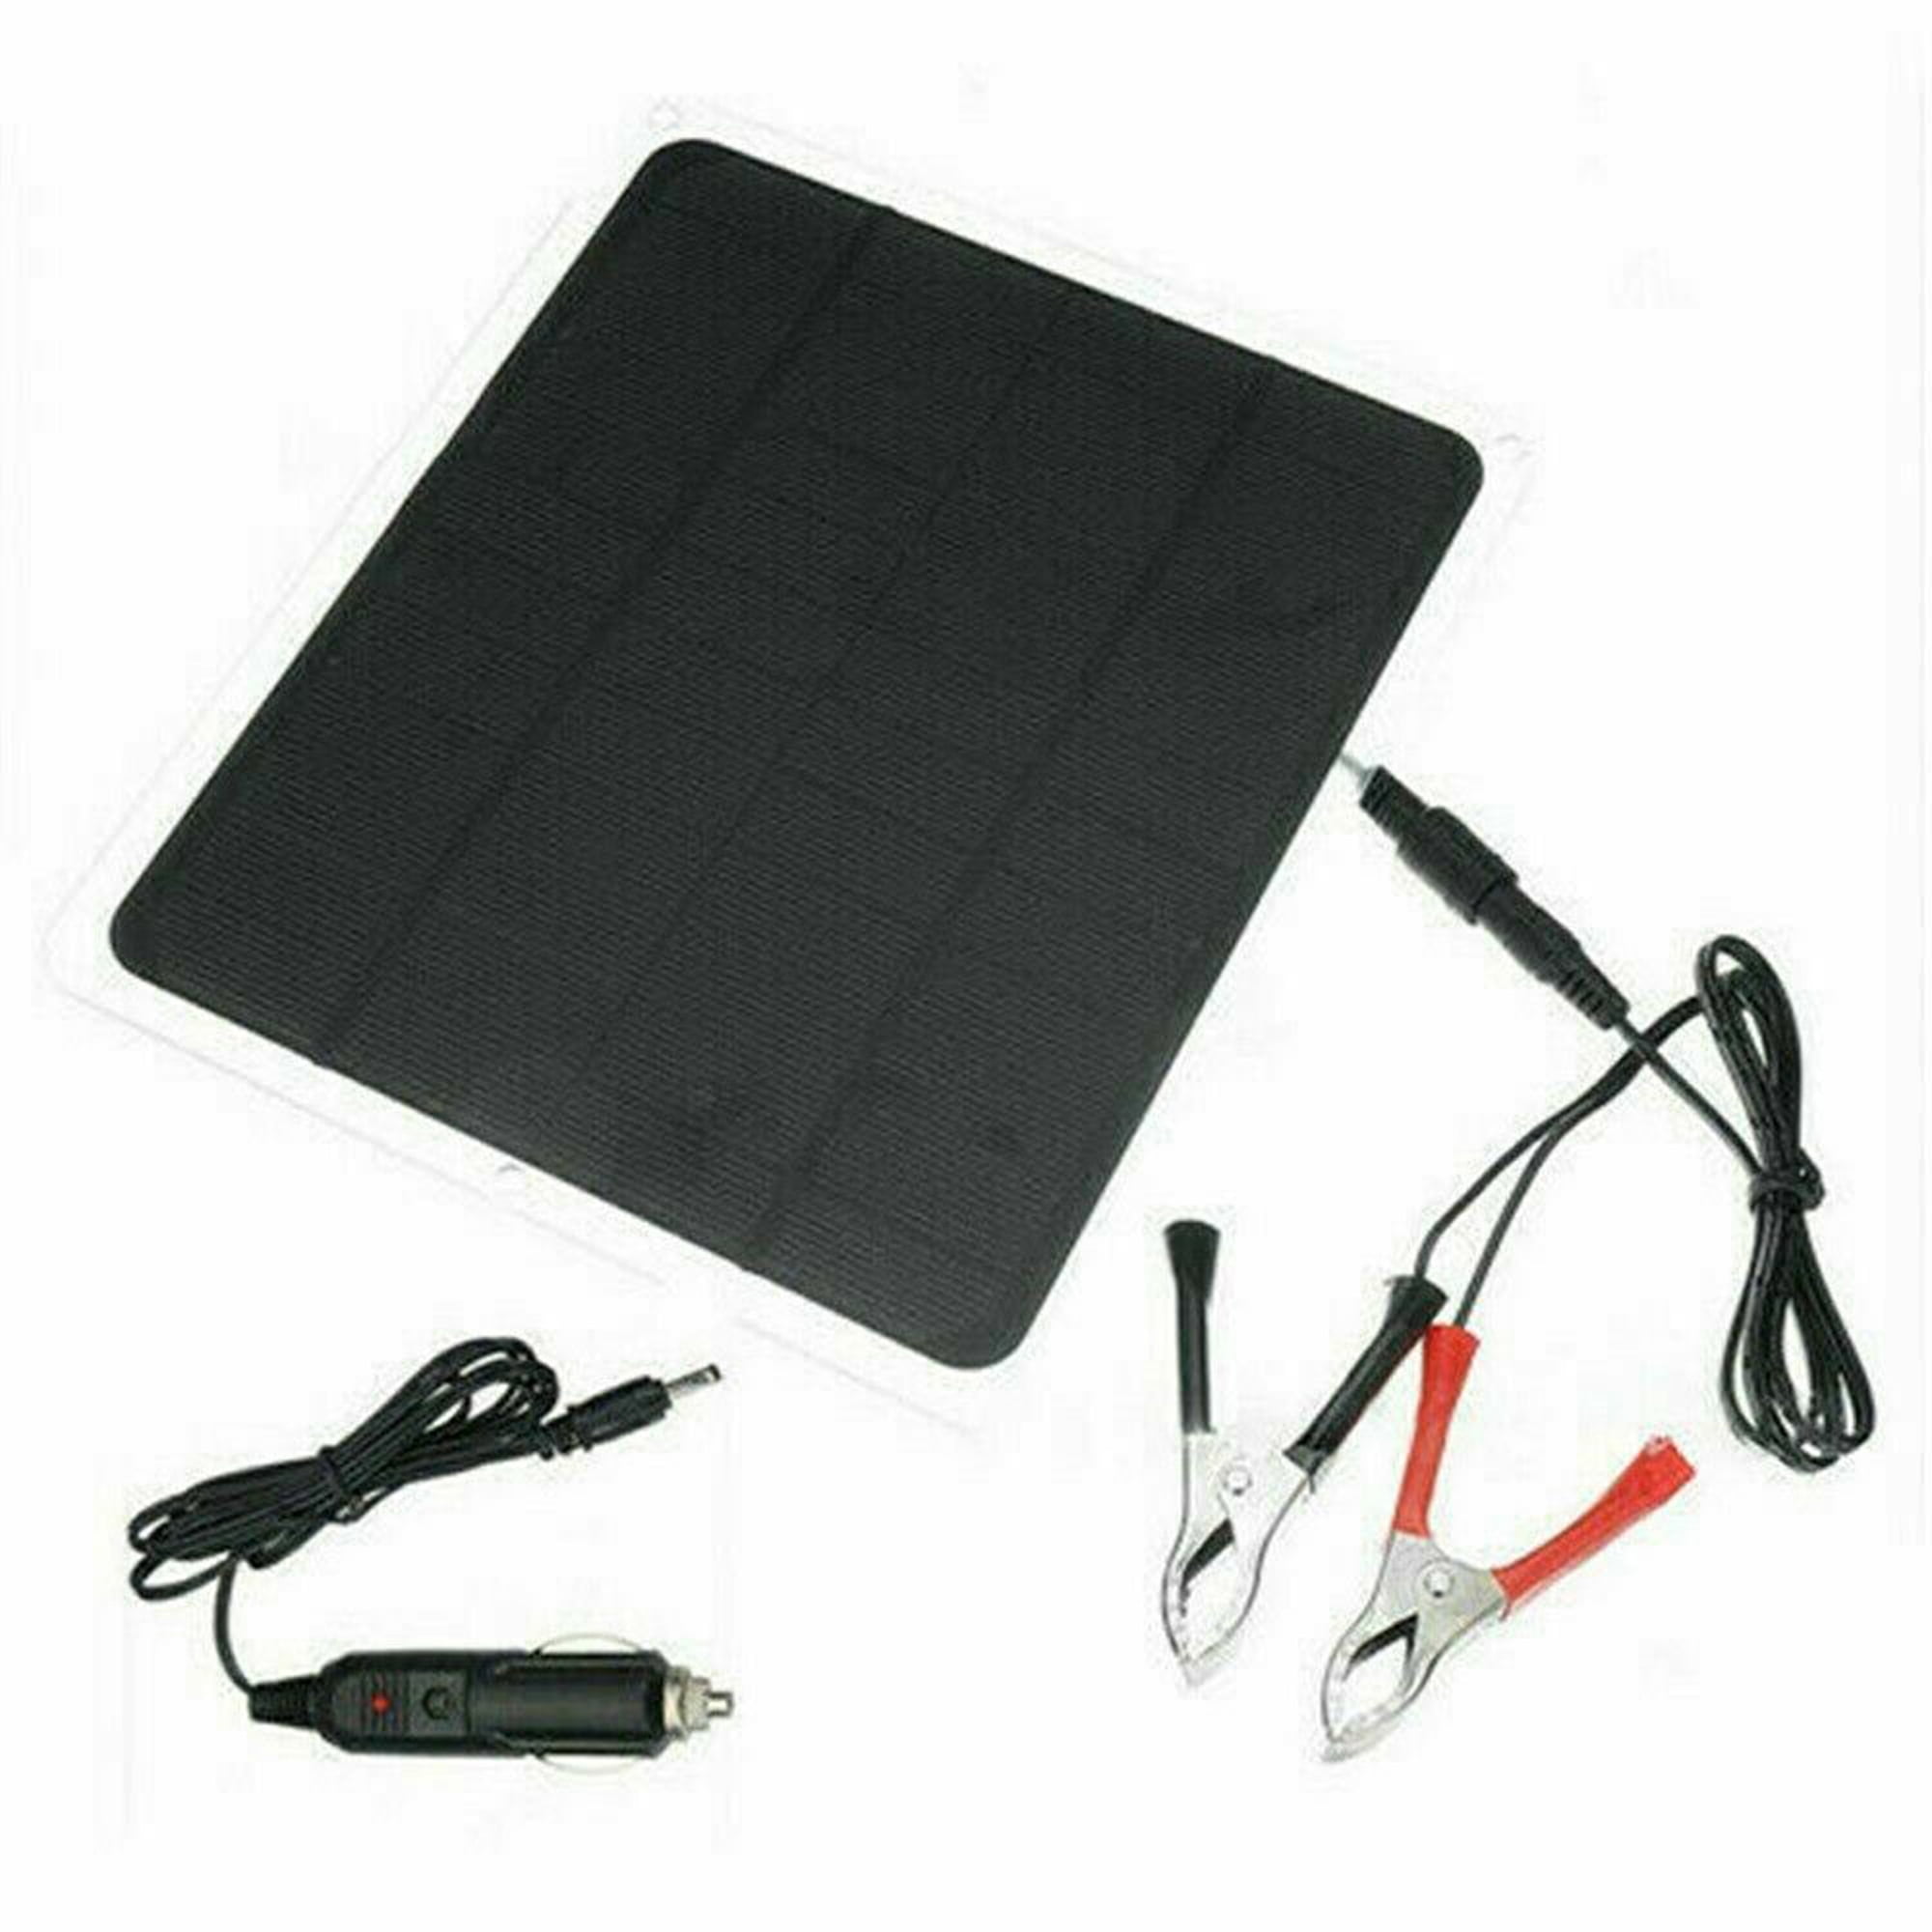 12V 20W Outdoor Car Boat Yacht Solar Panel Trickle Charger Power Battery Su P8O6 